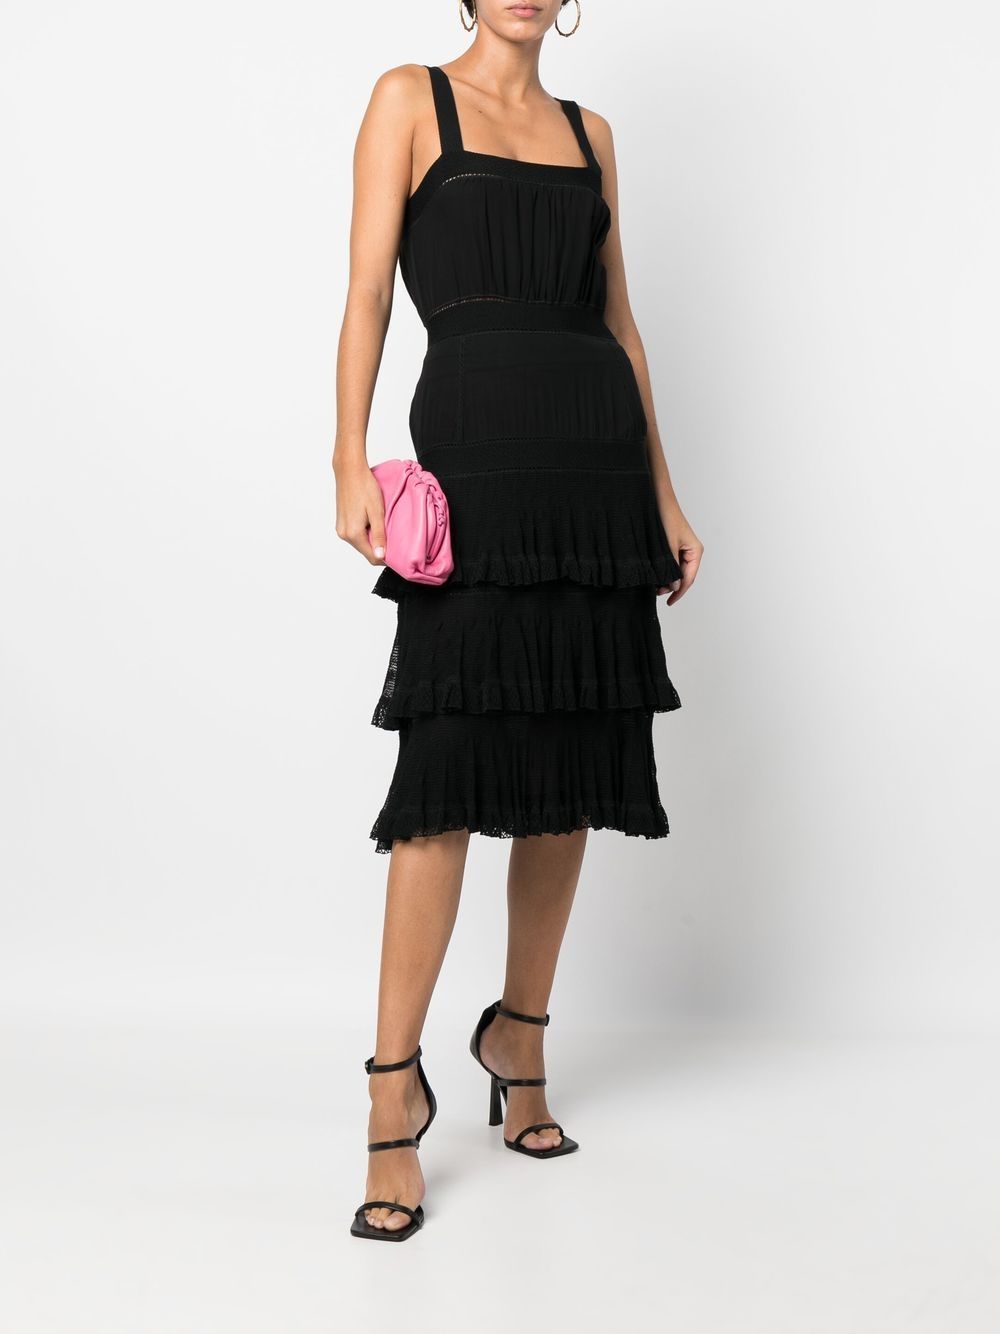 Chanel Pre-owned 2005 Layered Ruffle Dress - Black